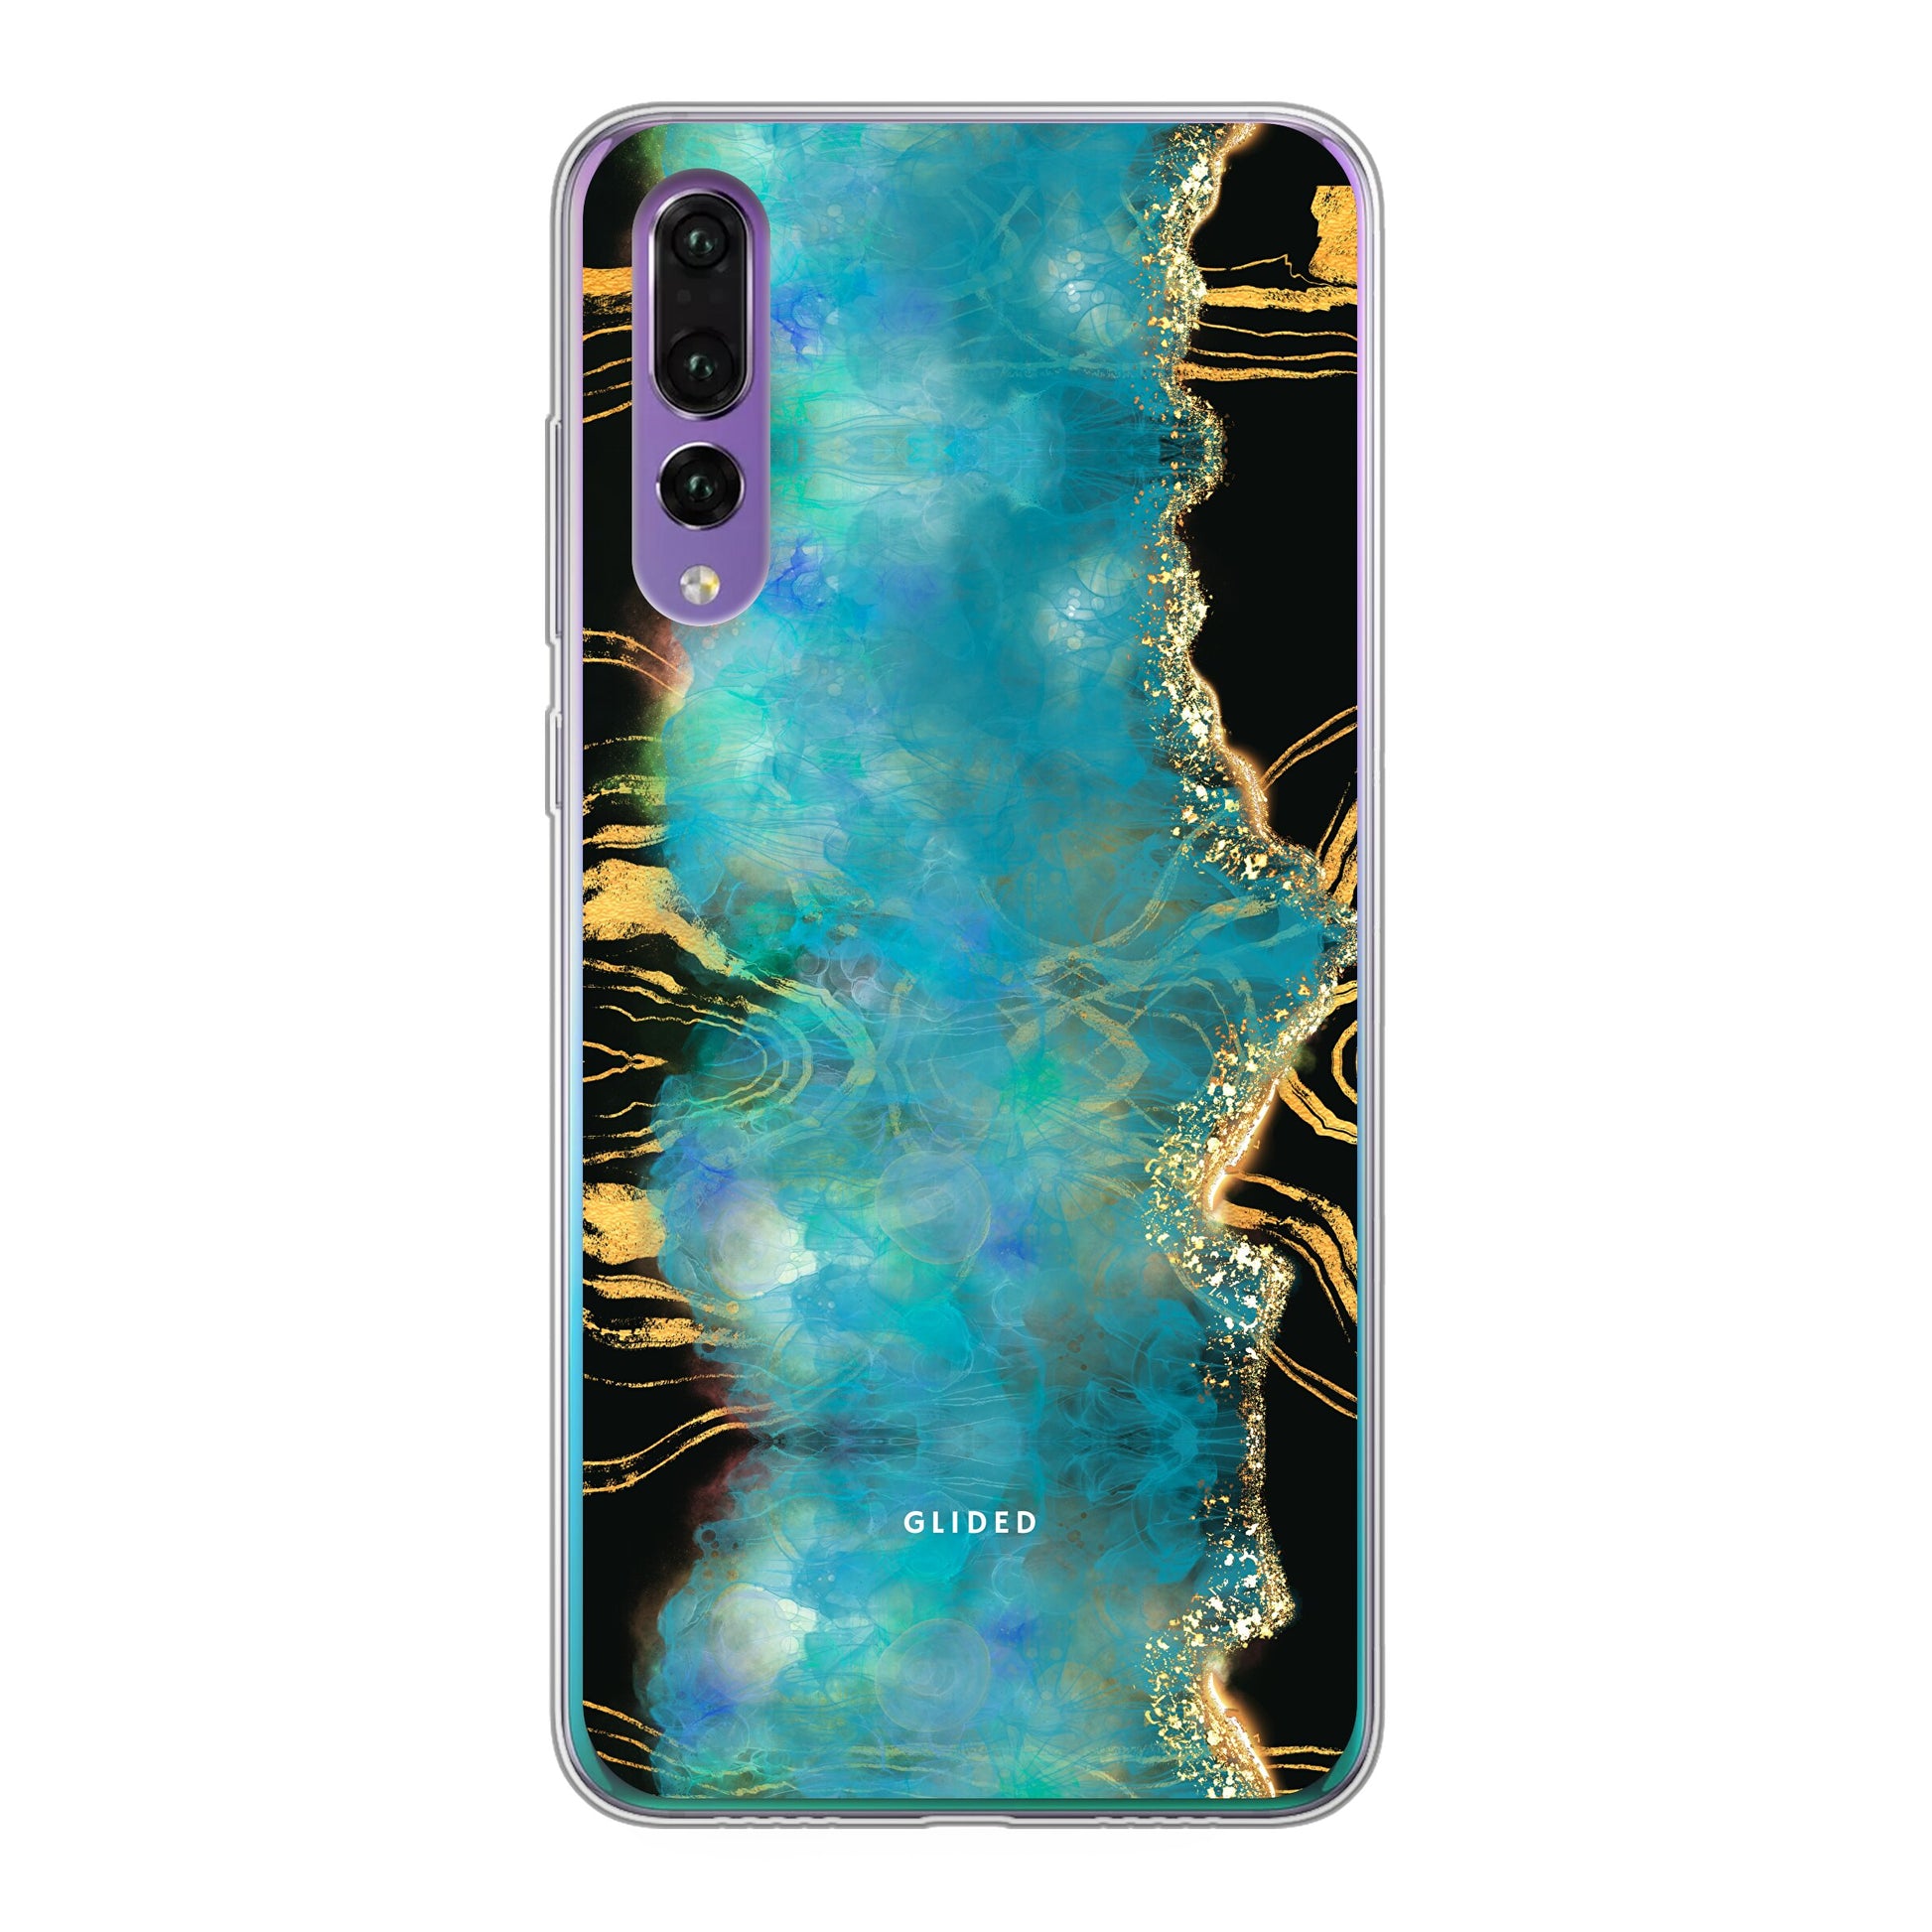 Waterly - Huawei P30 Handyhülle Soft case